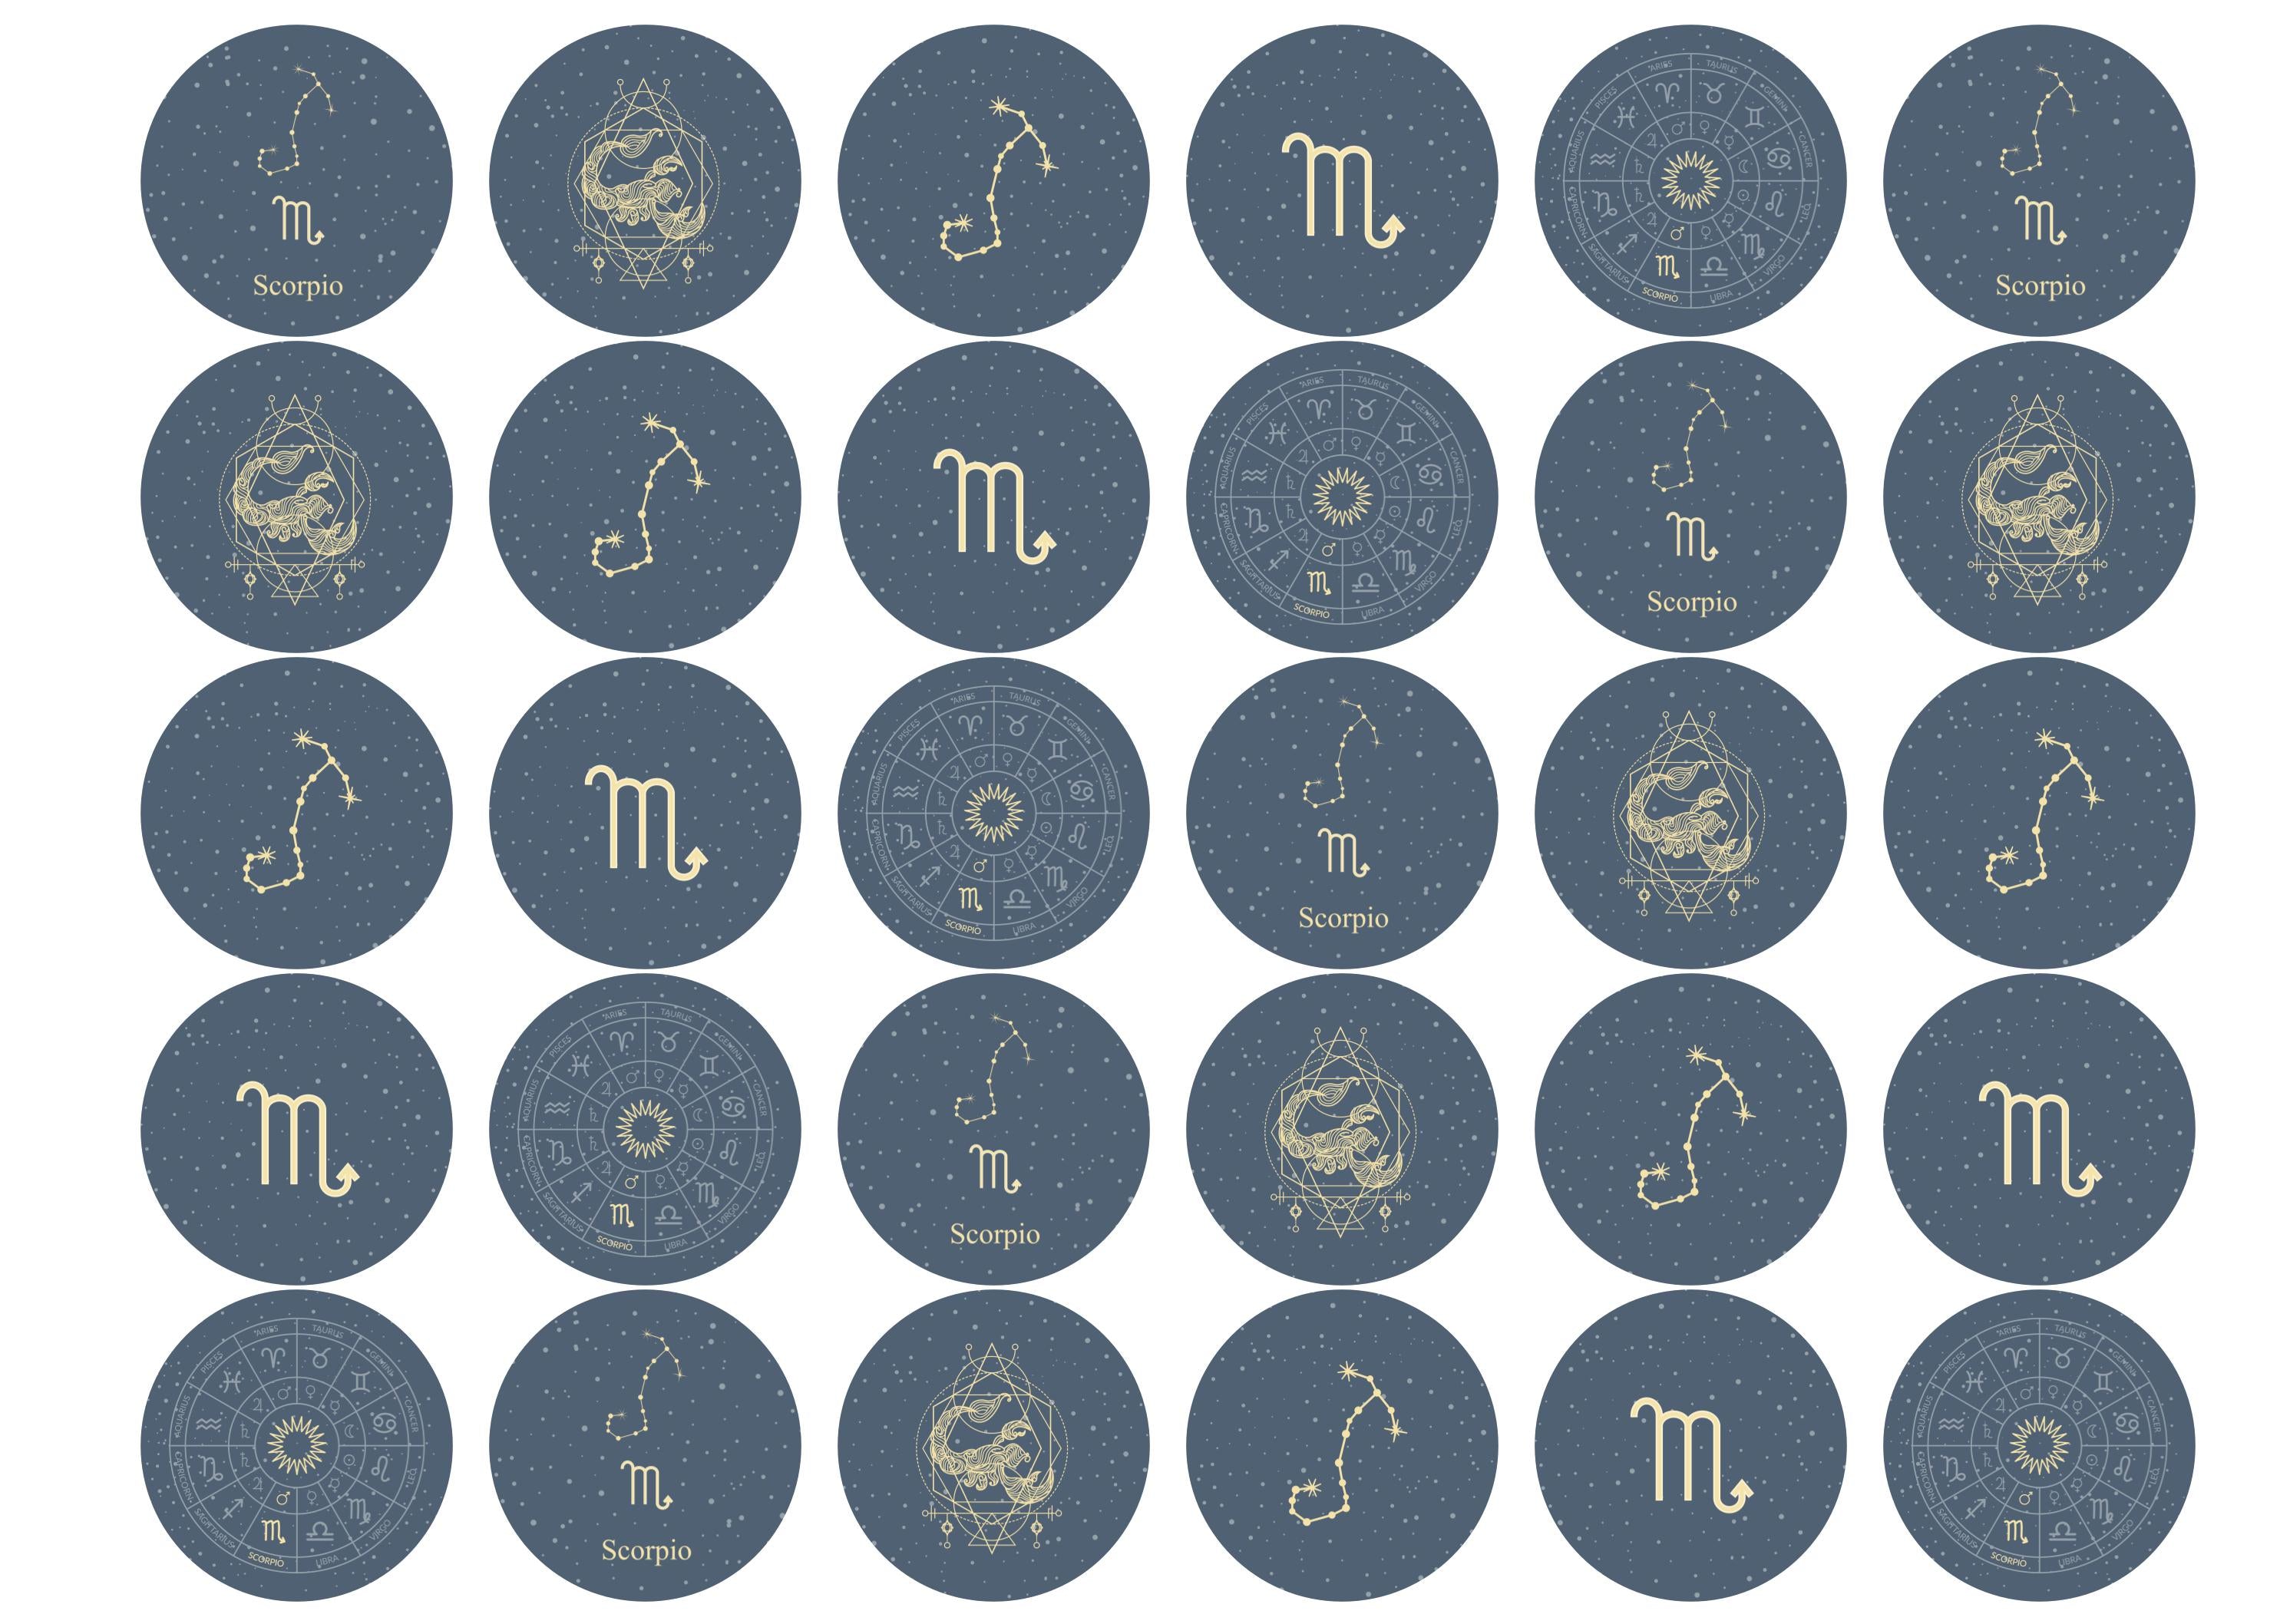 30 edible toppers with Scorpio zodiac star sign design